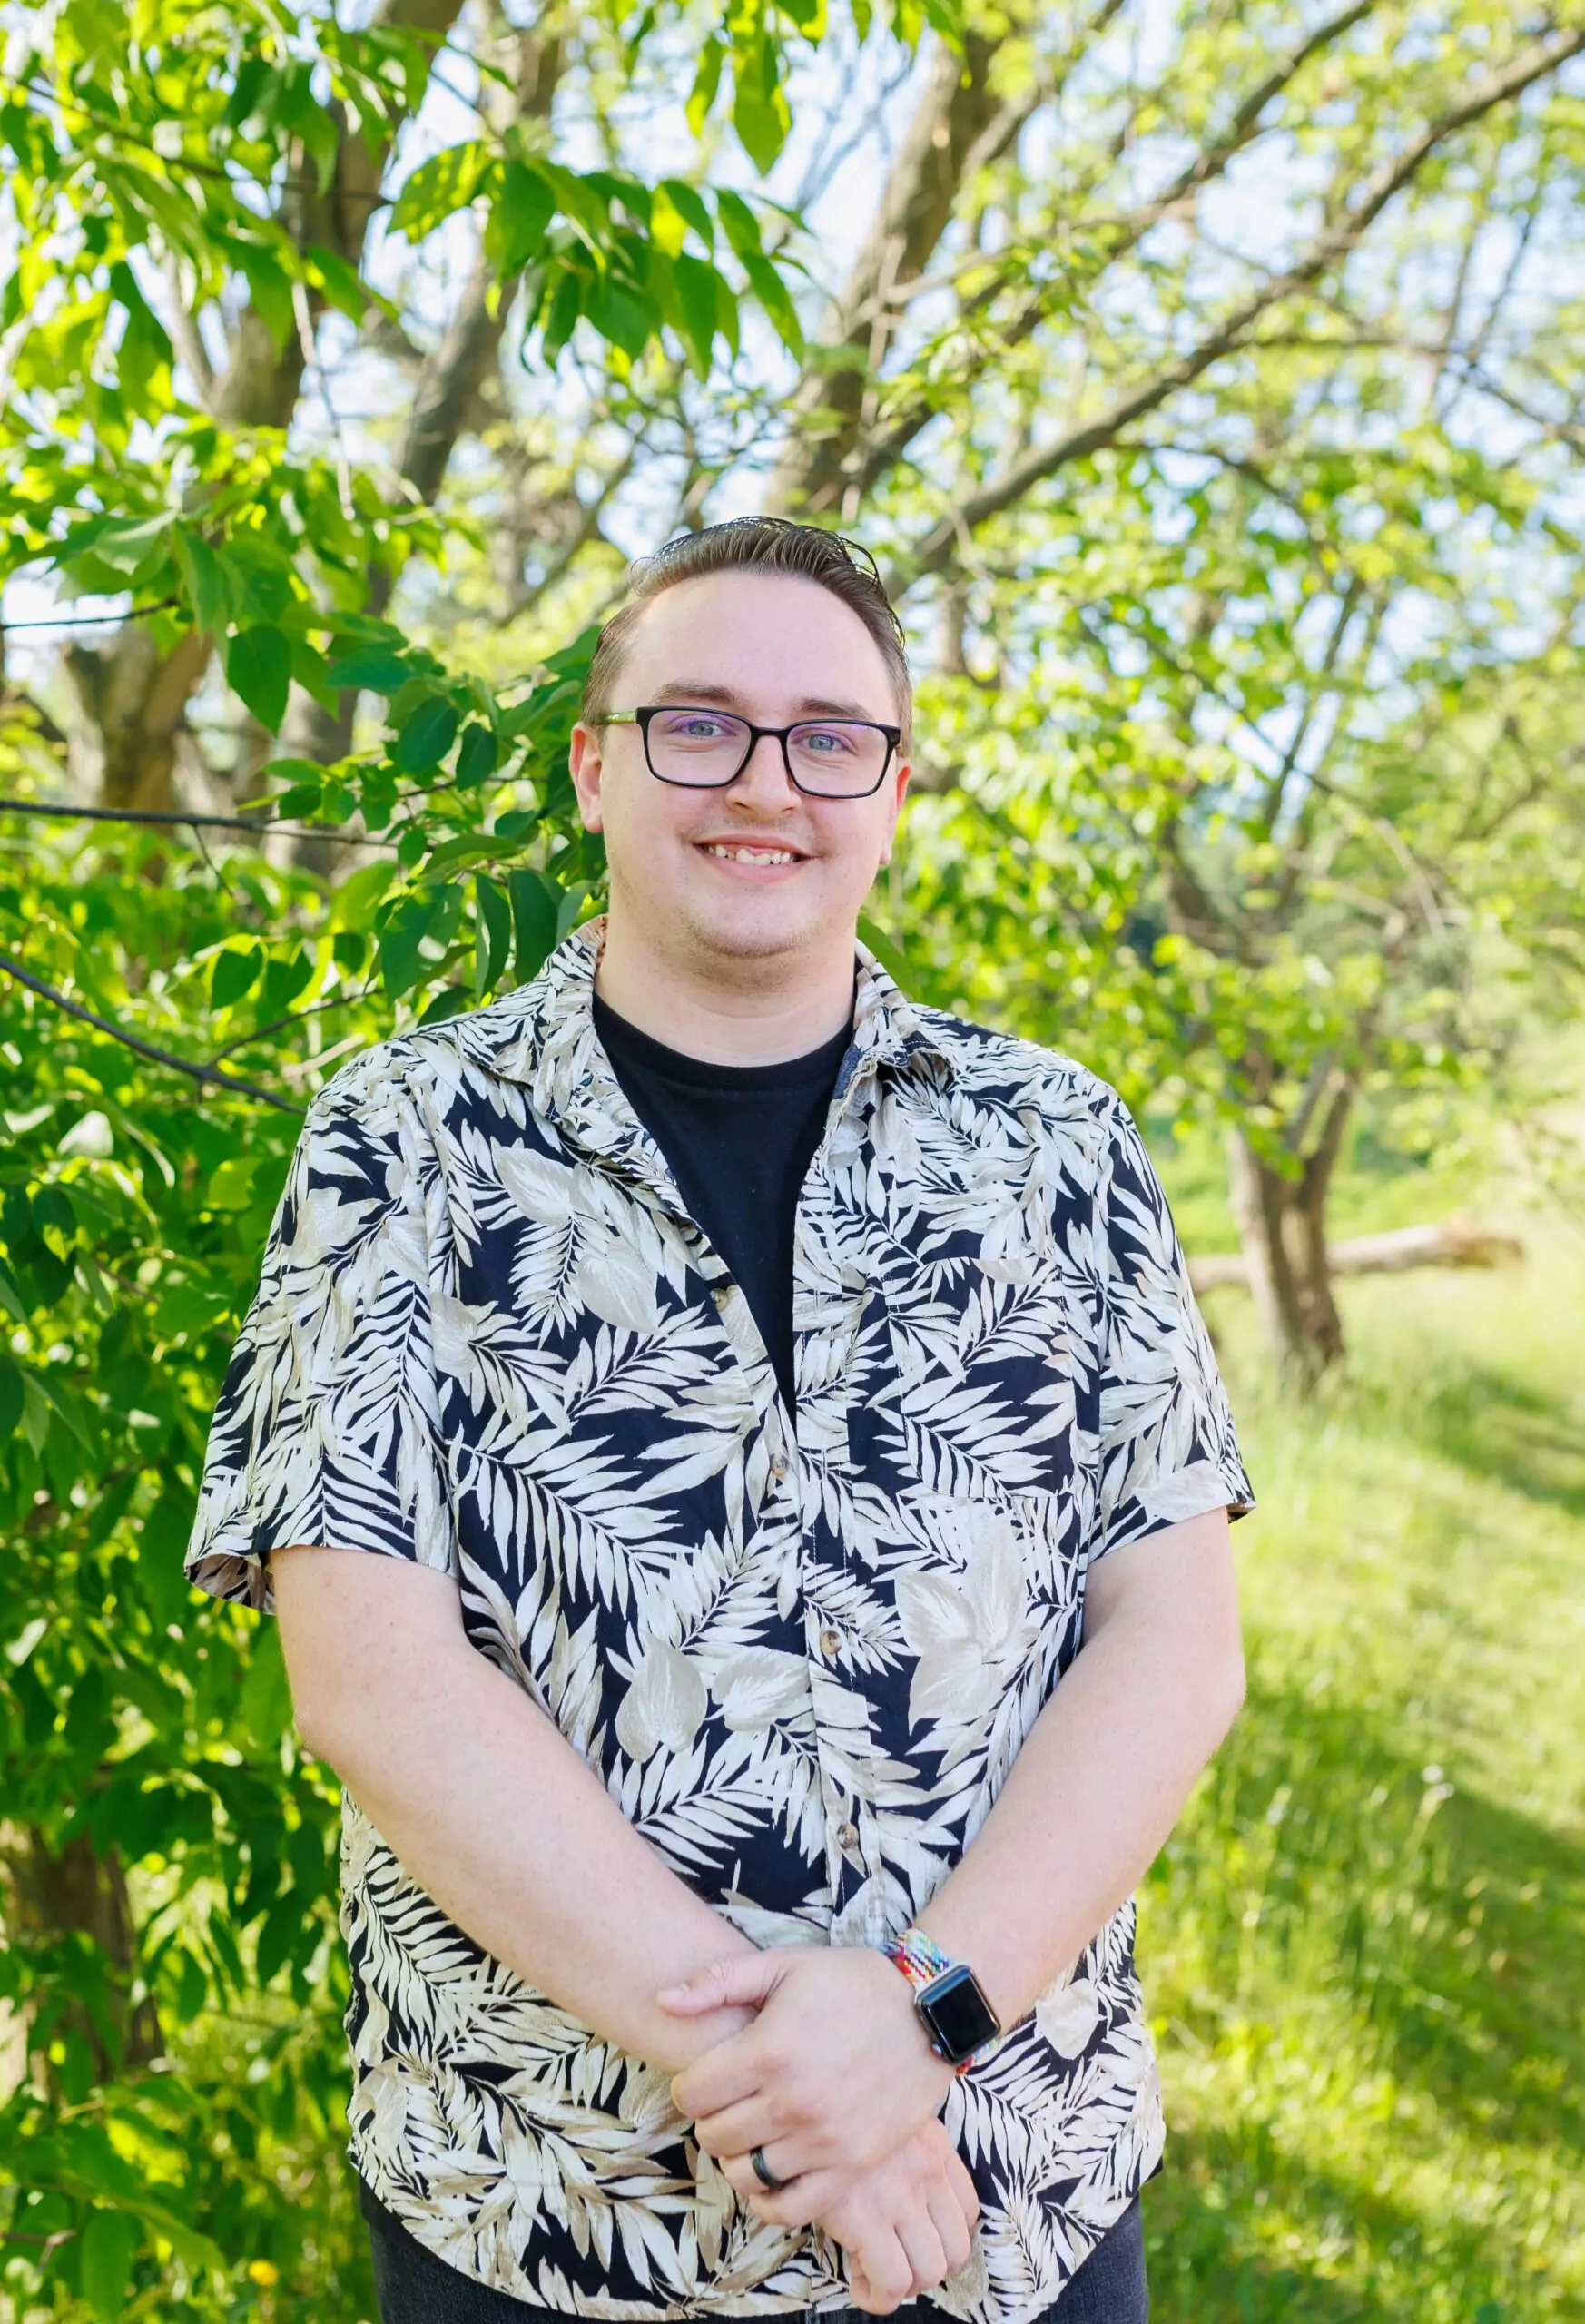 Jared Sparks standing in front of a green tree. He has short dark hair and round, dark glasses. He is wearing a black and white aloha shirt over a black t-shirt.